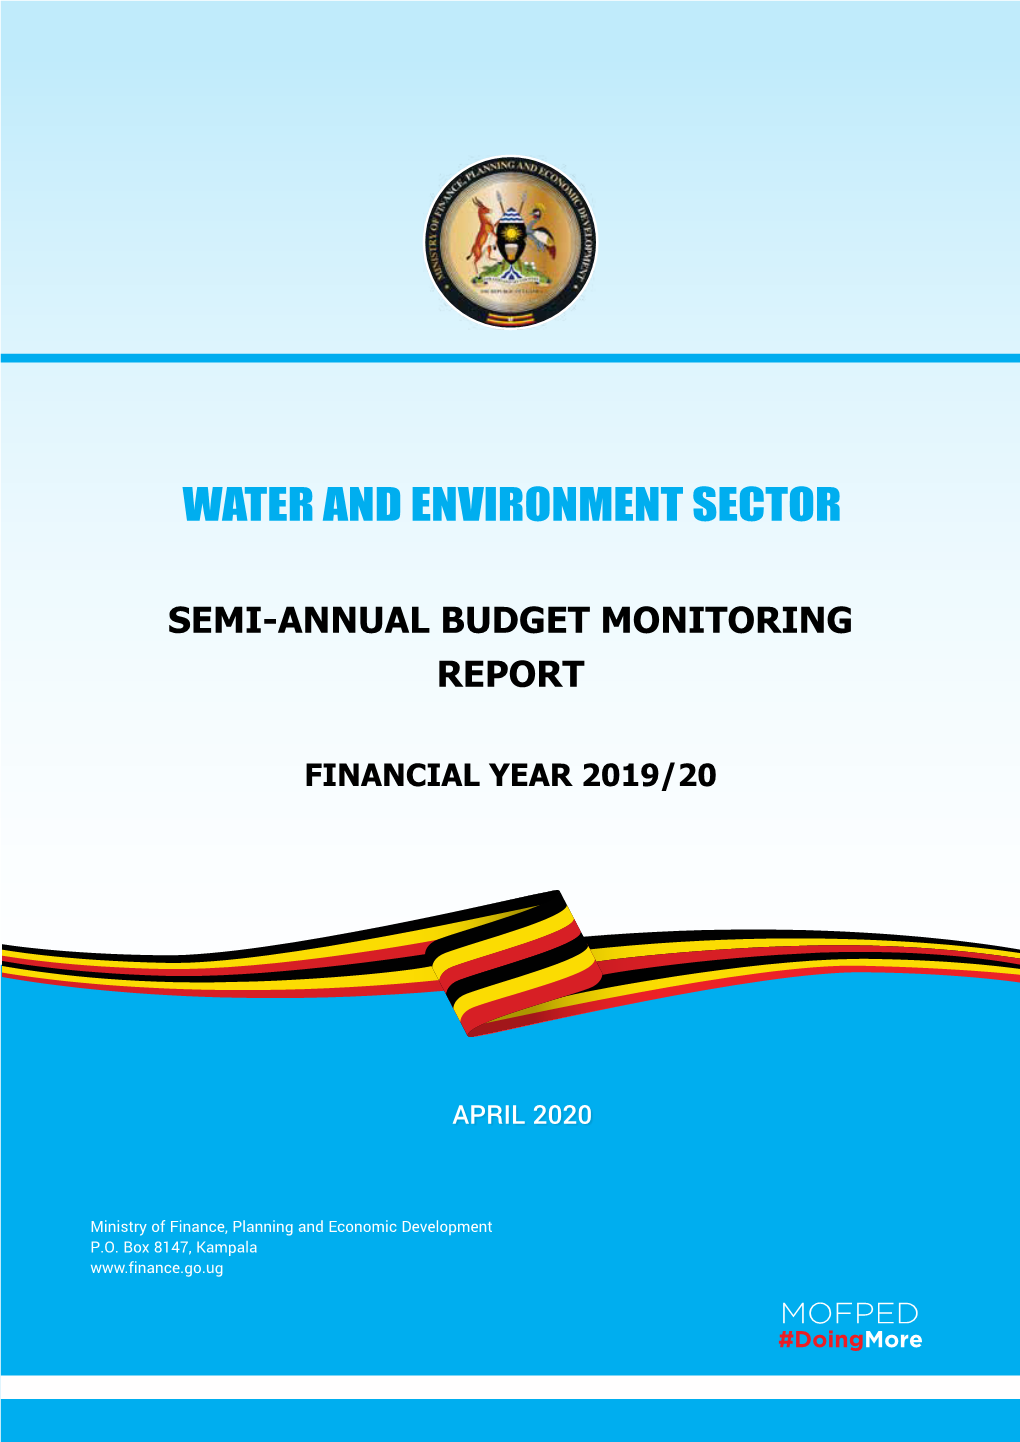 Water and Environment Sector Semi-Annual Monitoring Report